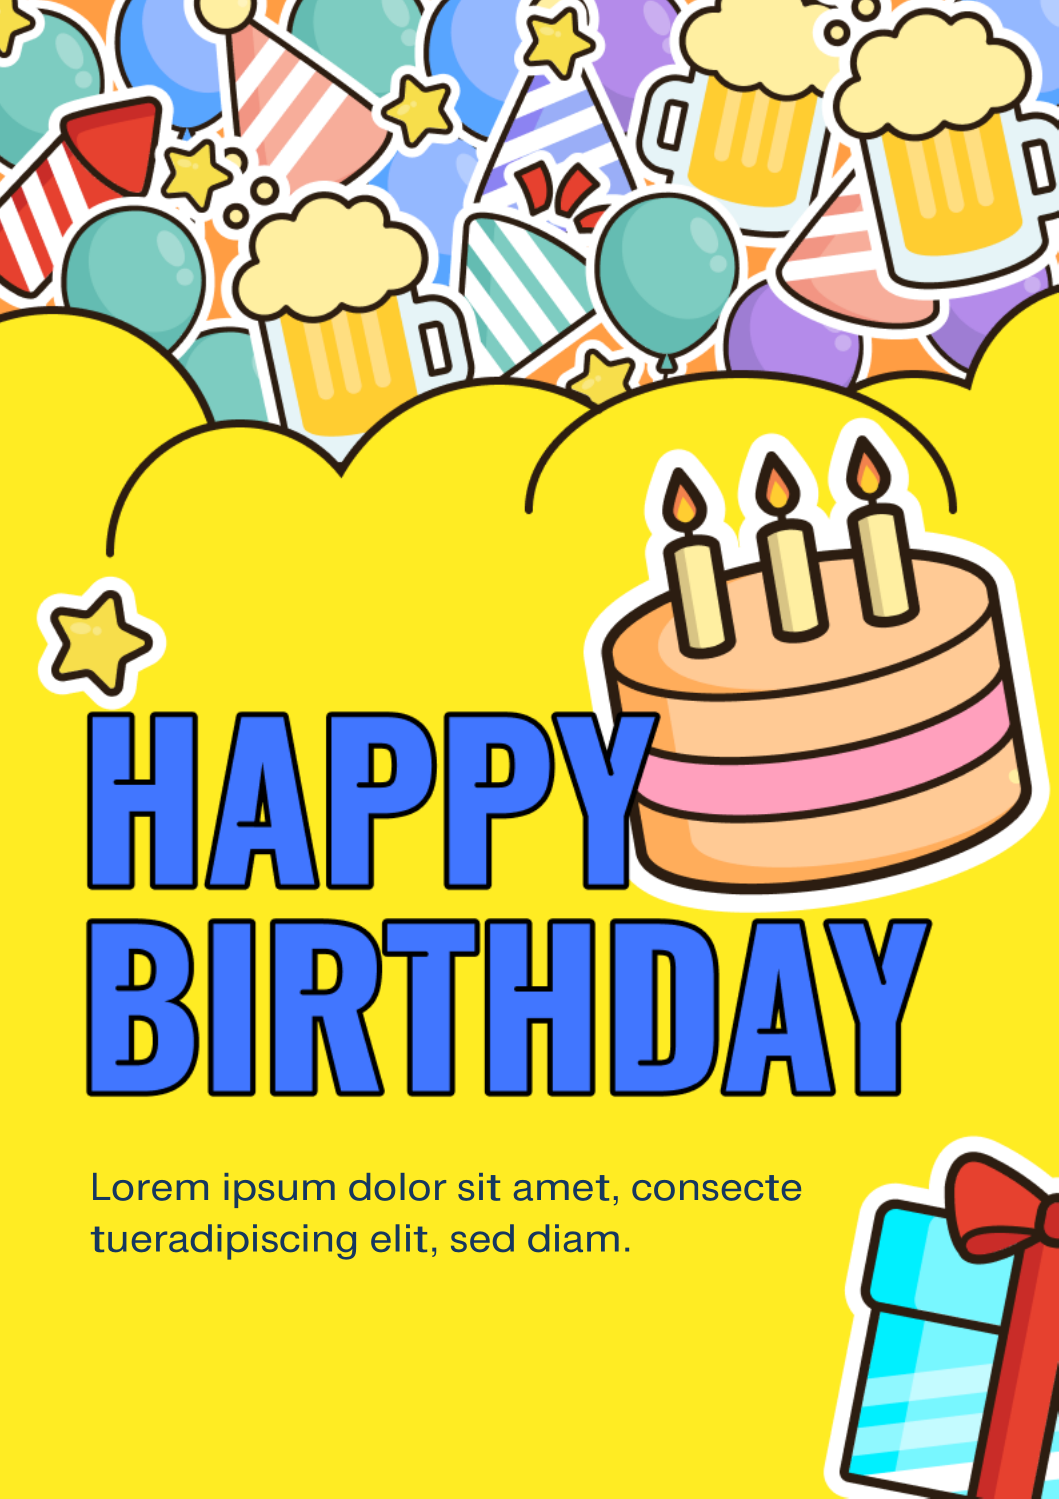 Birthday wishes card for teacher 1